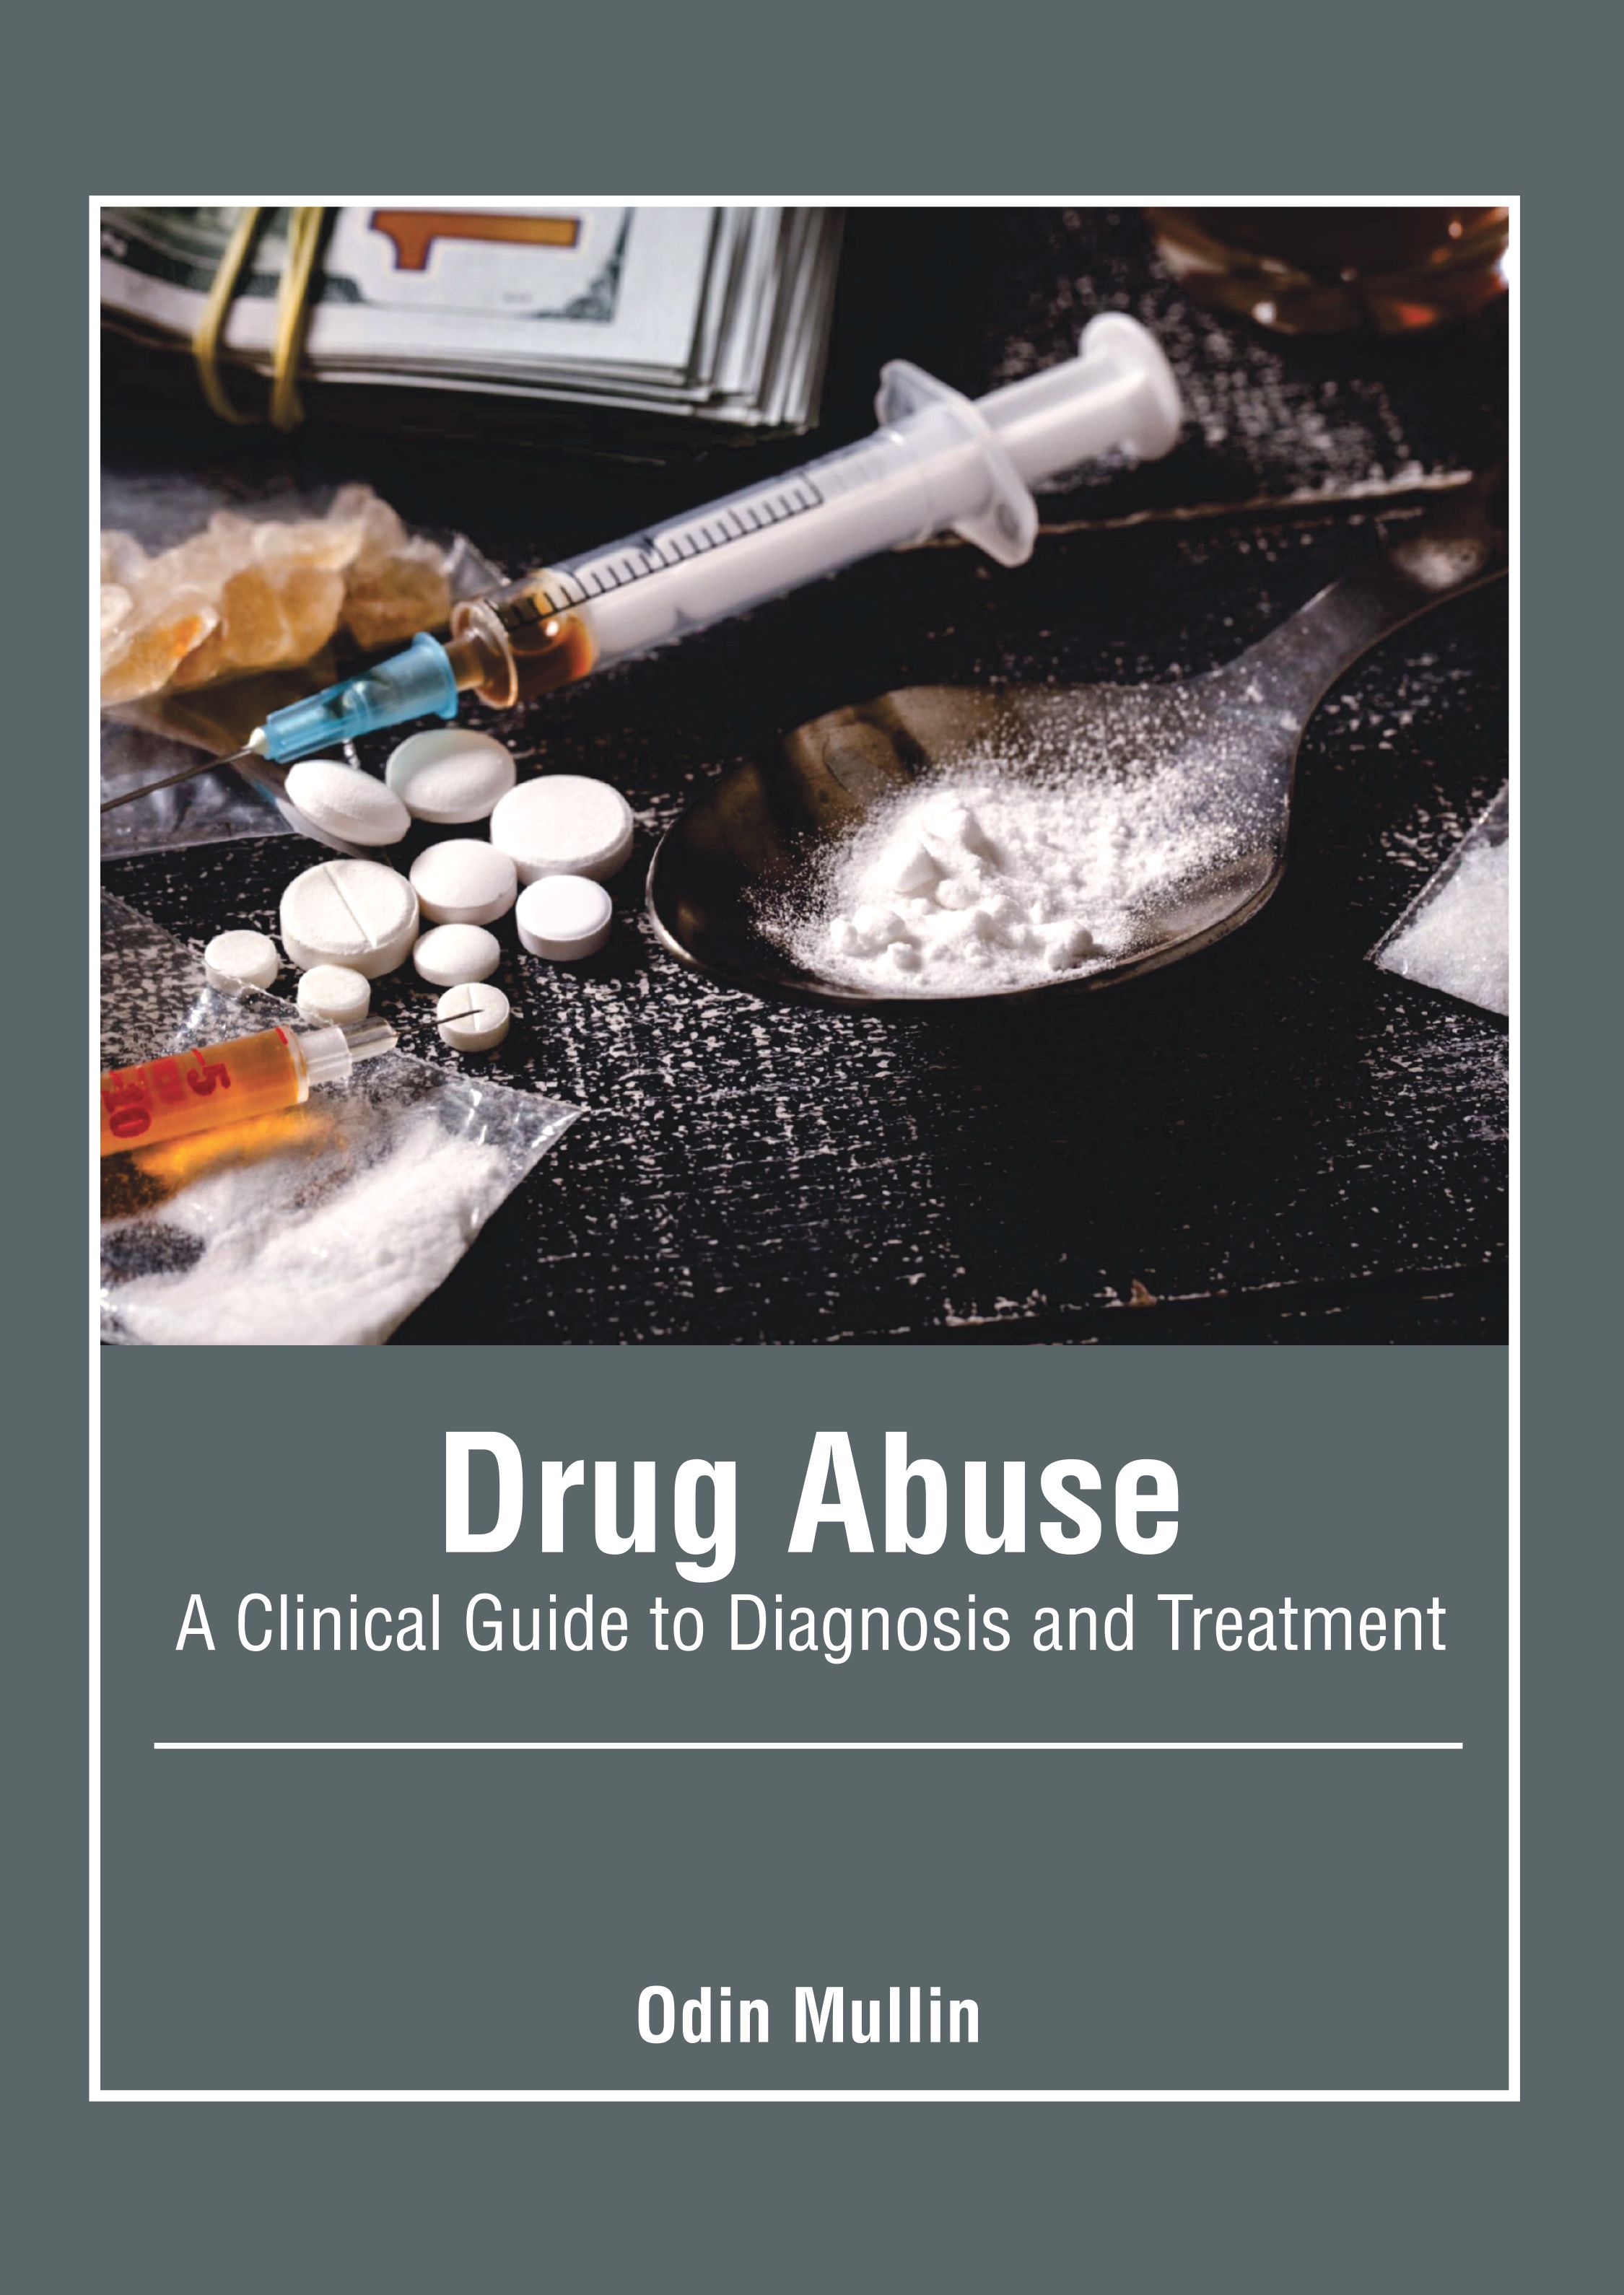 DRUG ABUSE: A CLINICAL GUIDE TO DIAGNOSIS AND TREATMENT